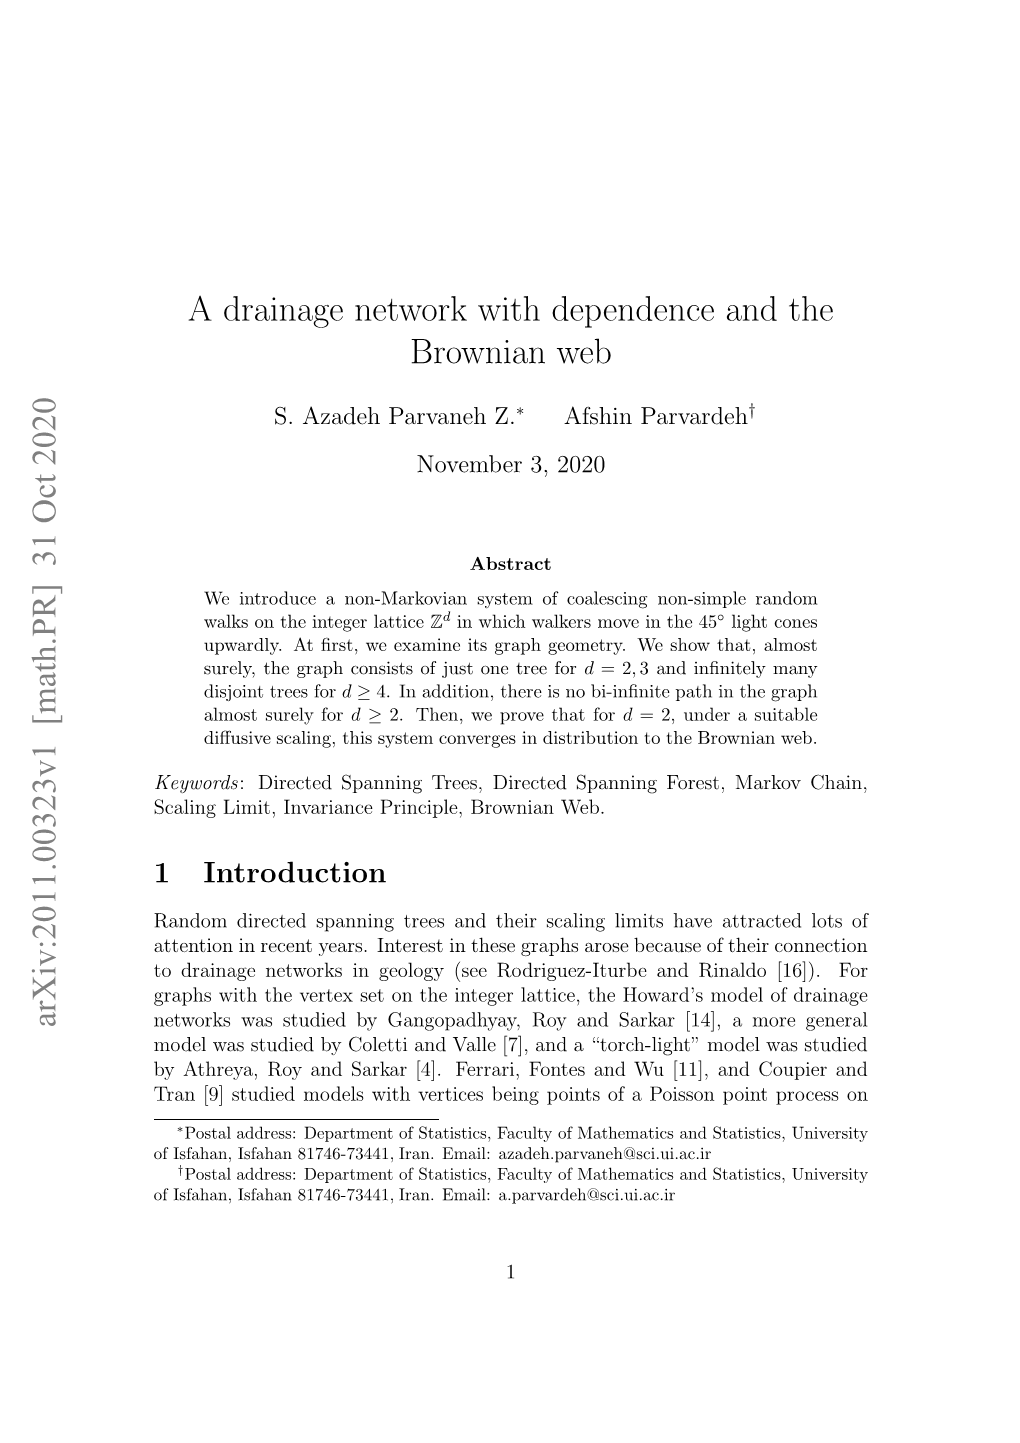 A Drainage Network with Dependence and the Brownian